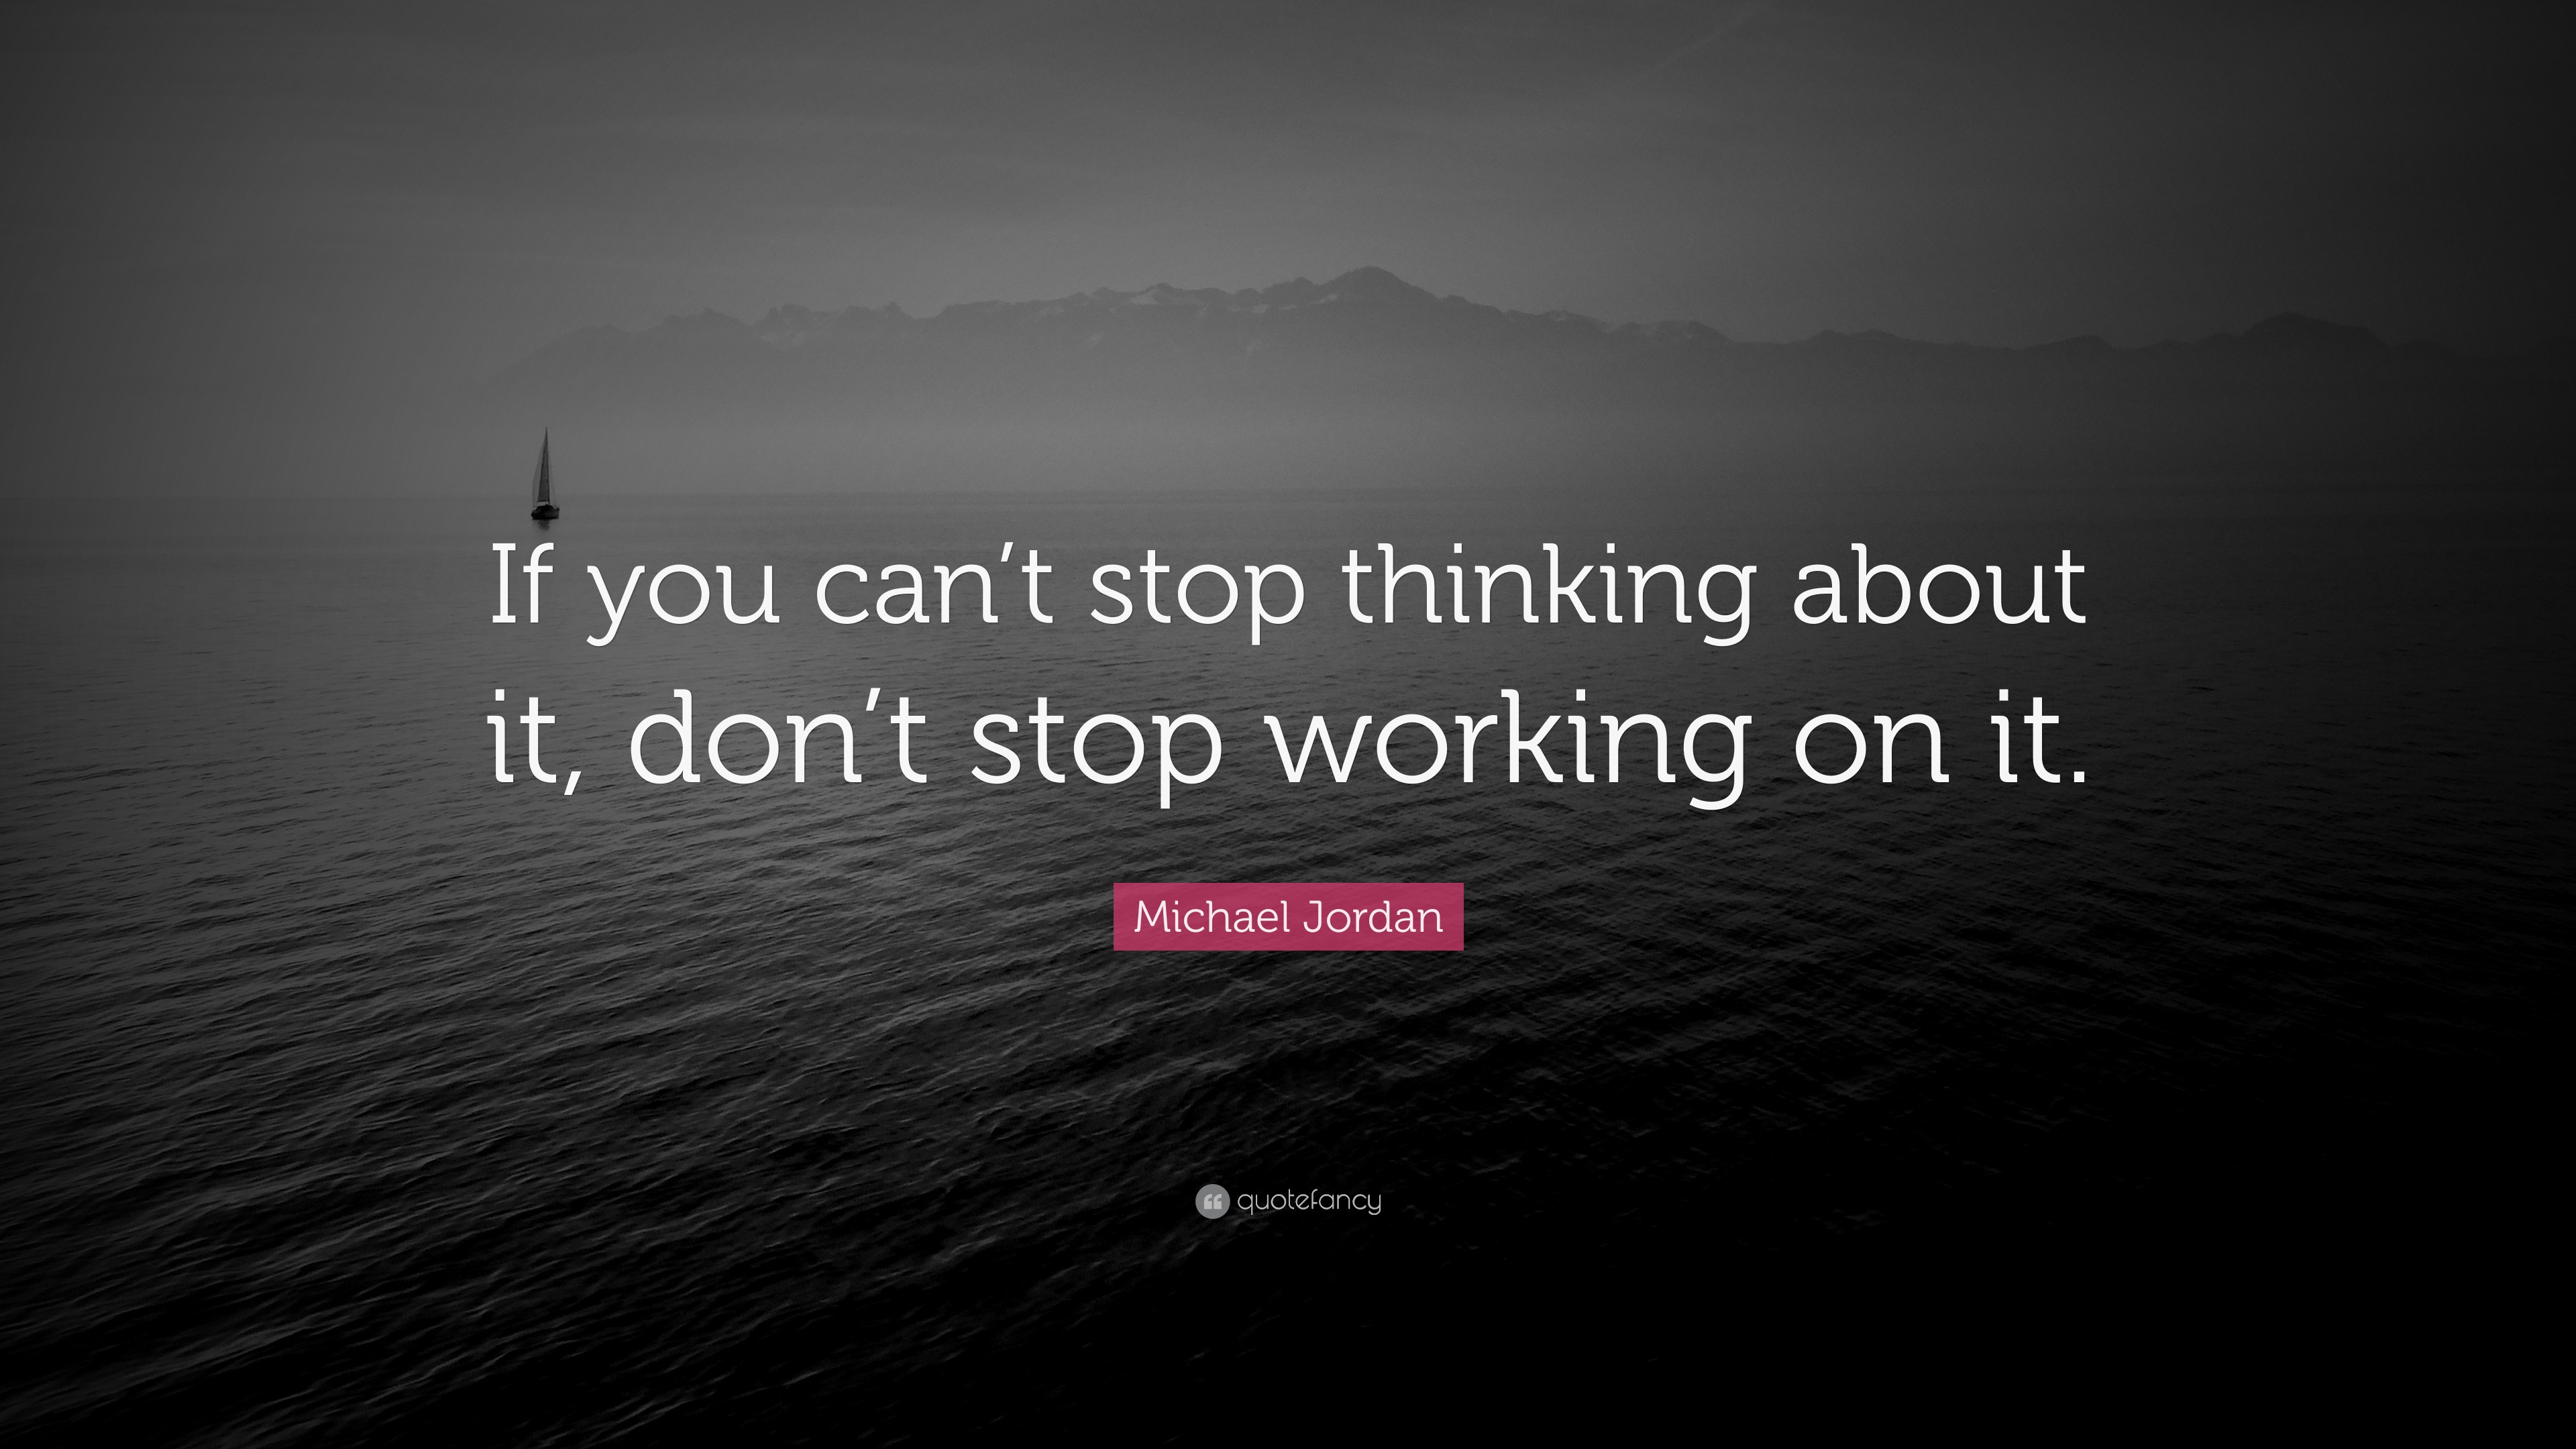 Michael Jordan Quote: "If you can't stop thinking about it ...